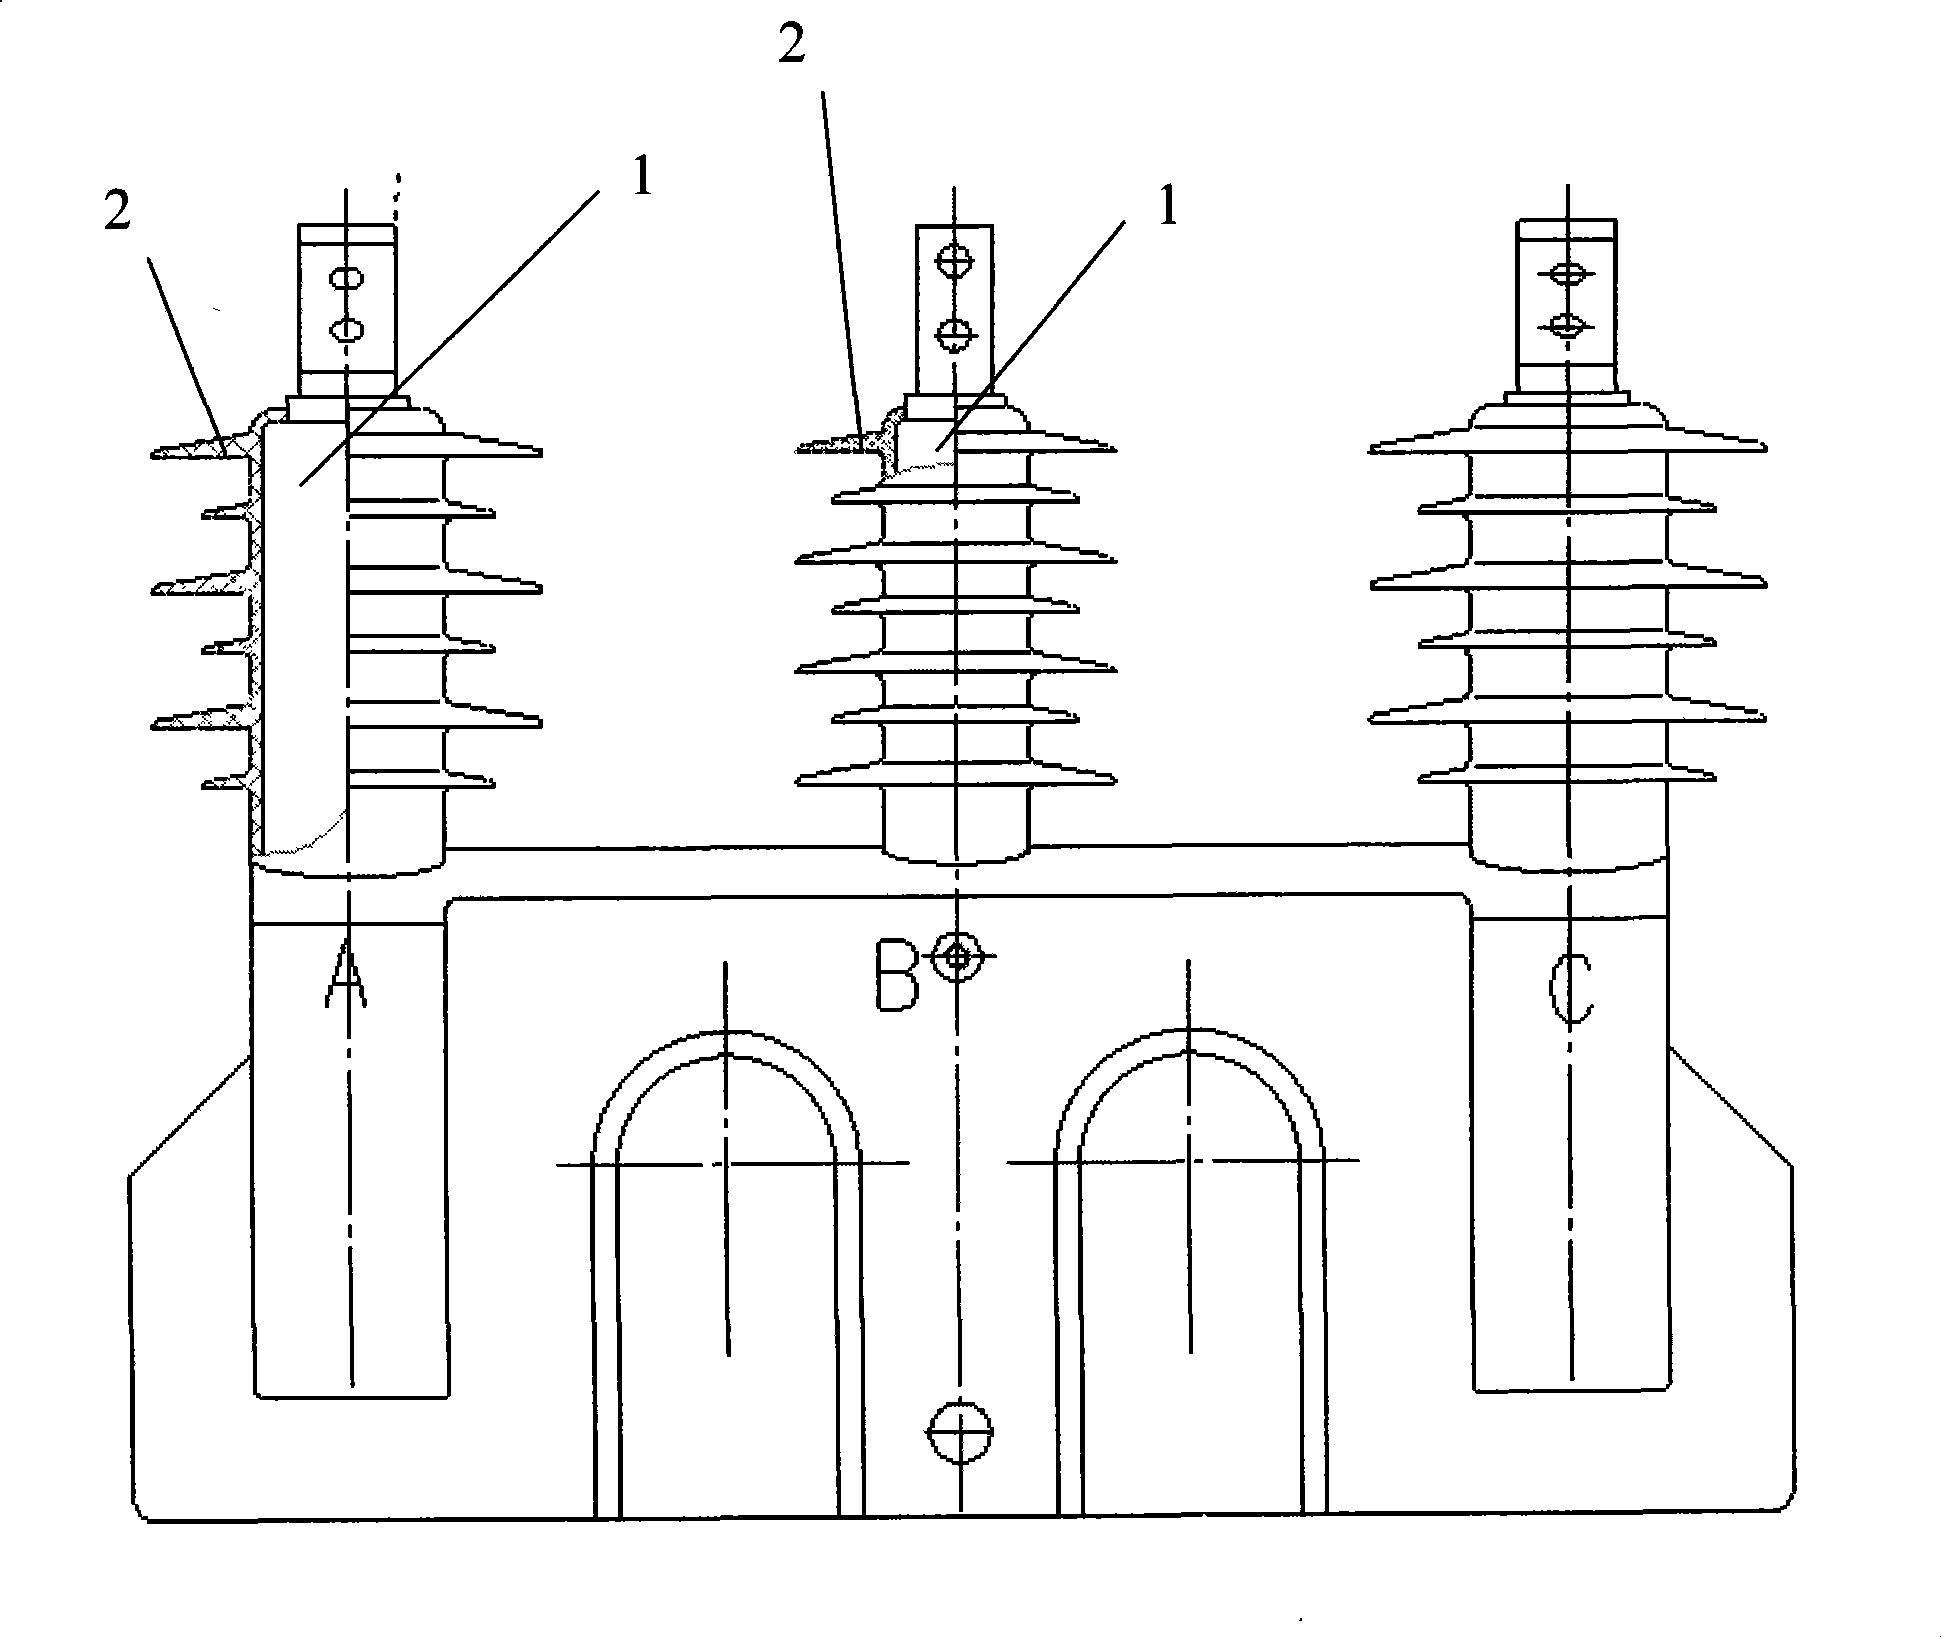 External insulator for mutual-inductor